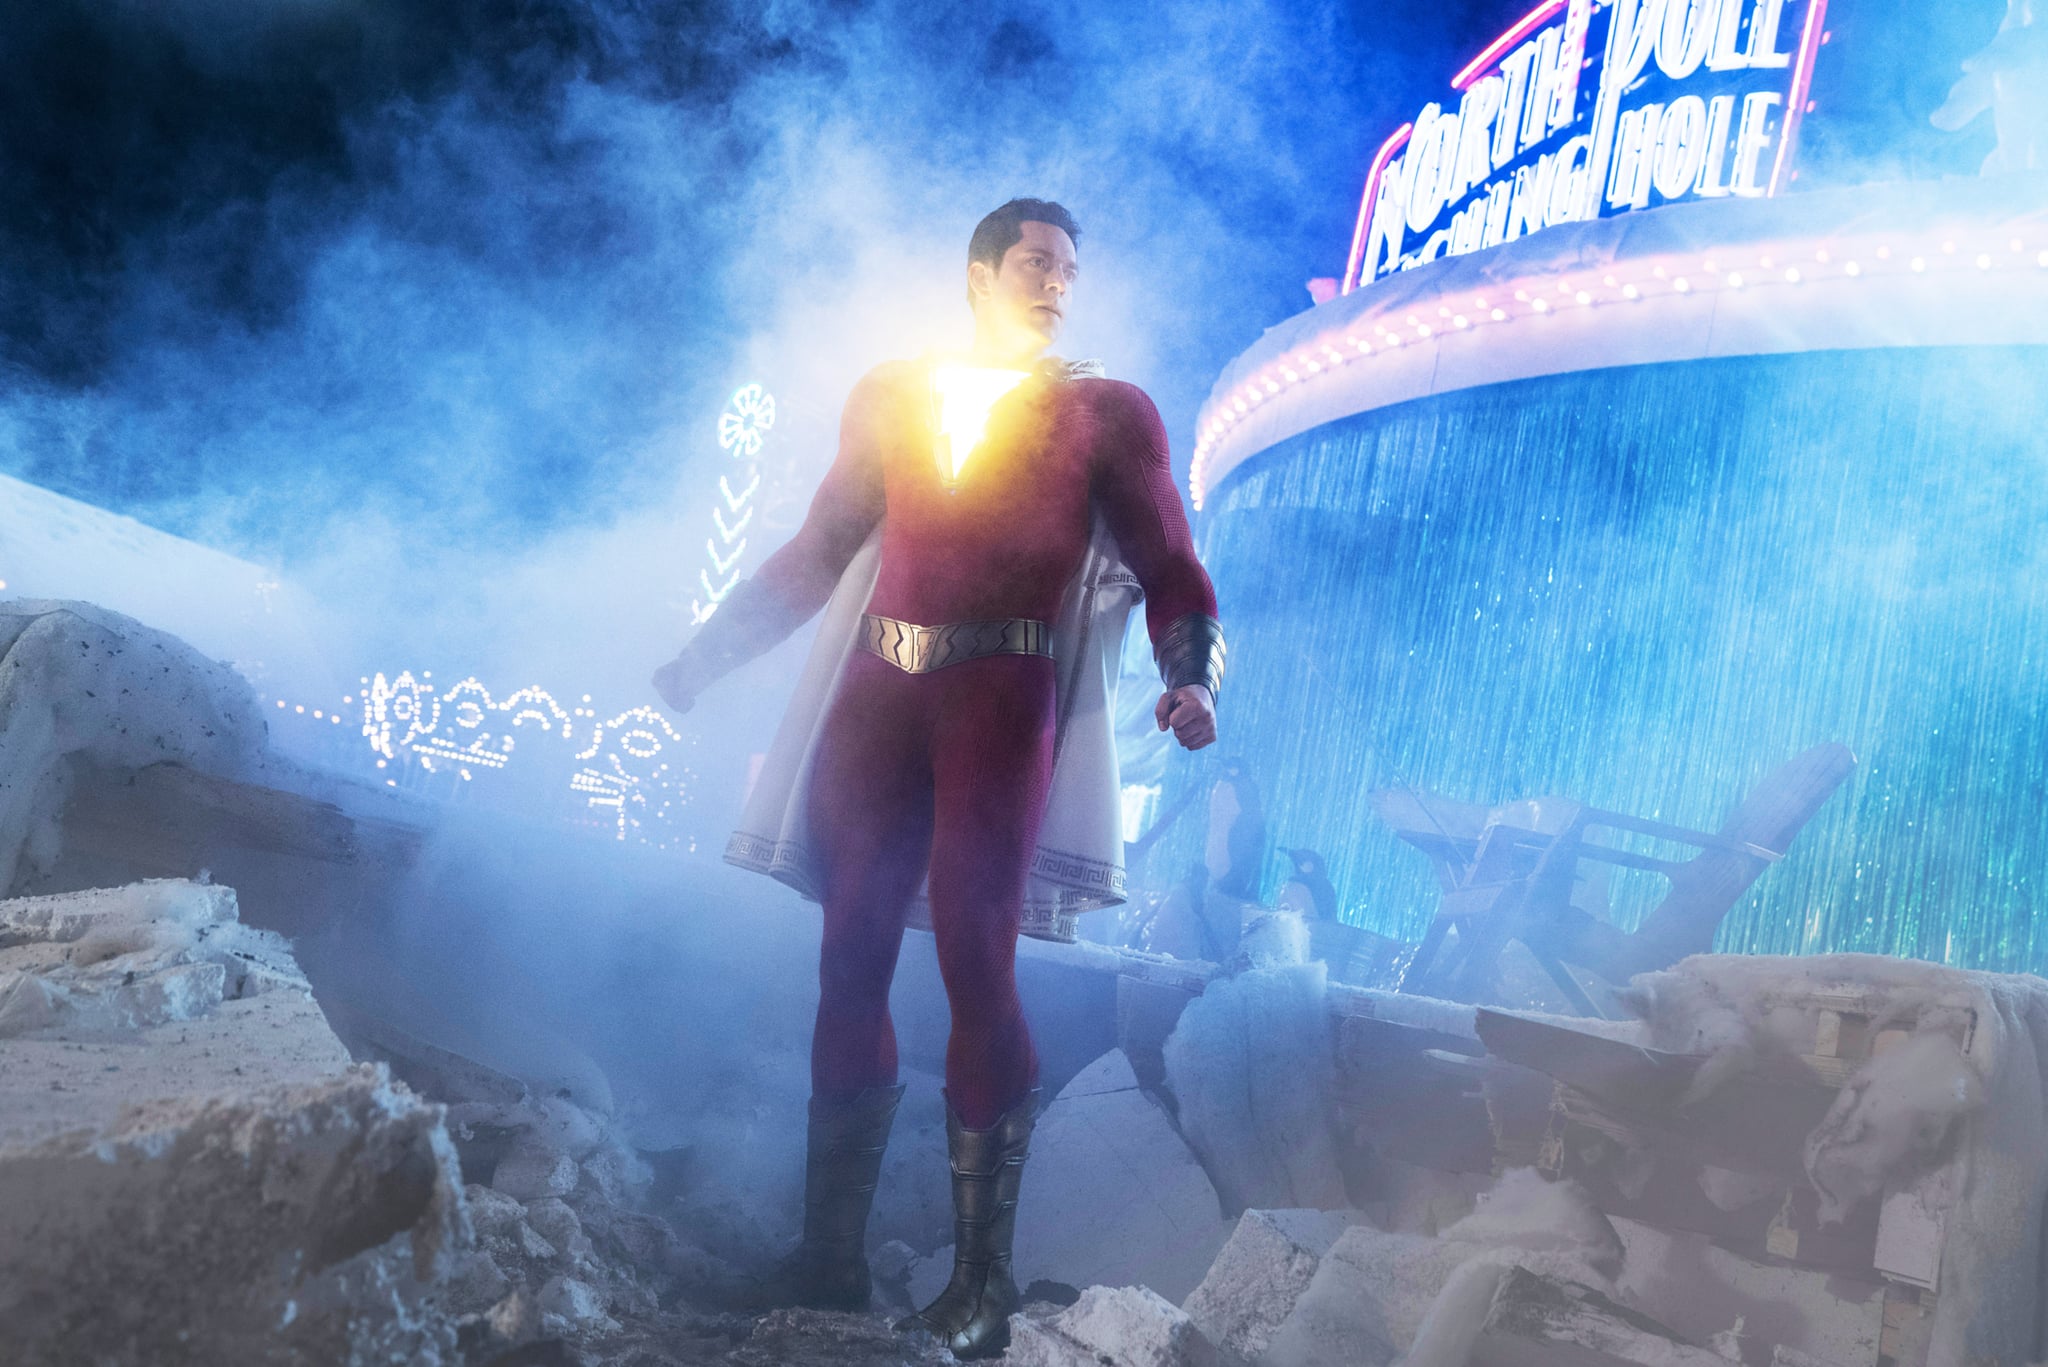 Shazam! Fury of the Gods Release Date, The Shazam Family Is Bigger and  Better Than Ever in the Sequel: Here's Everything We Know